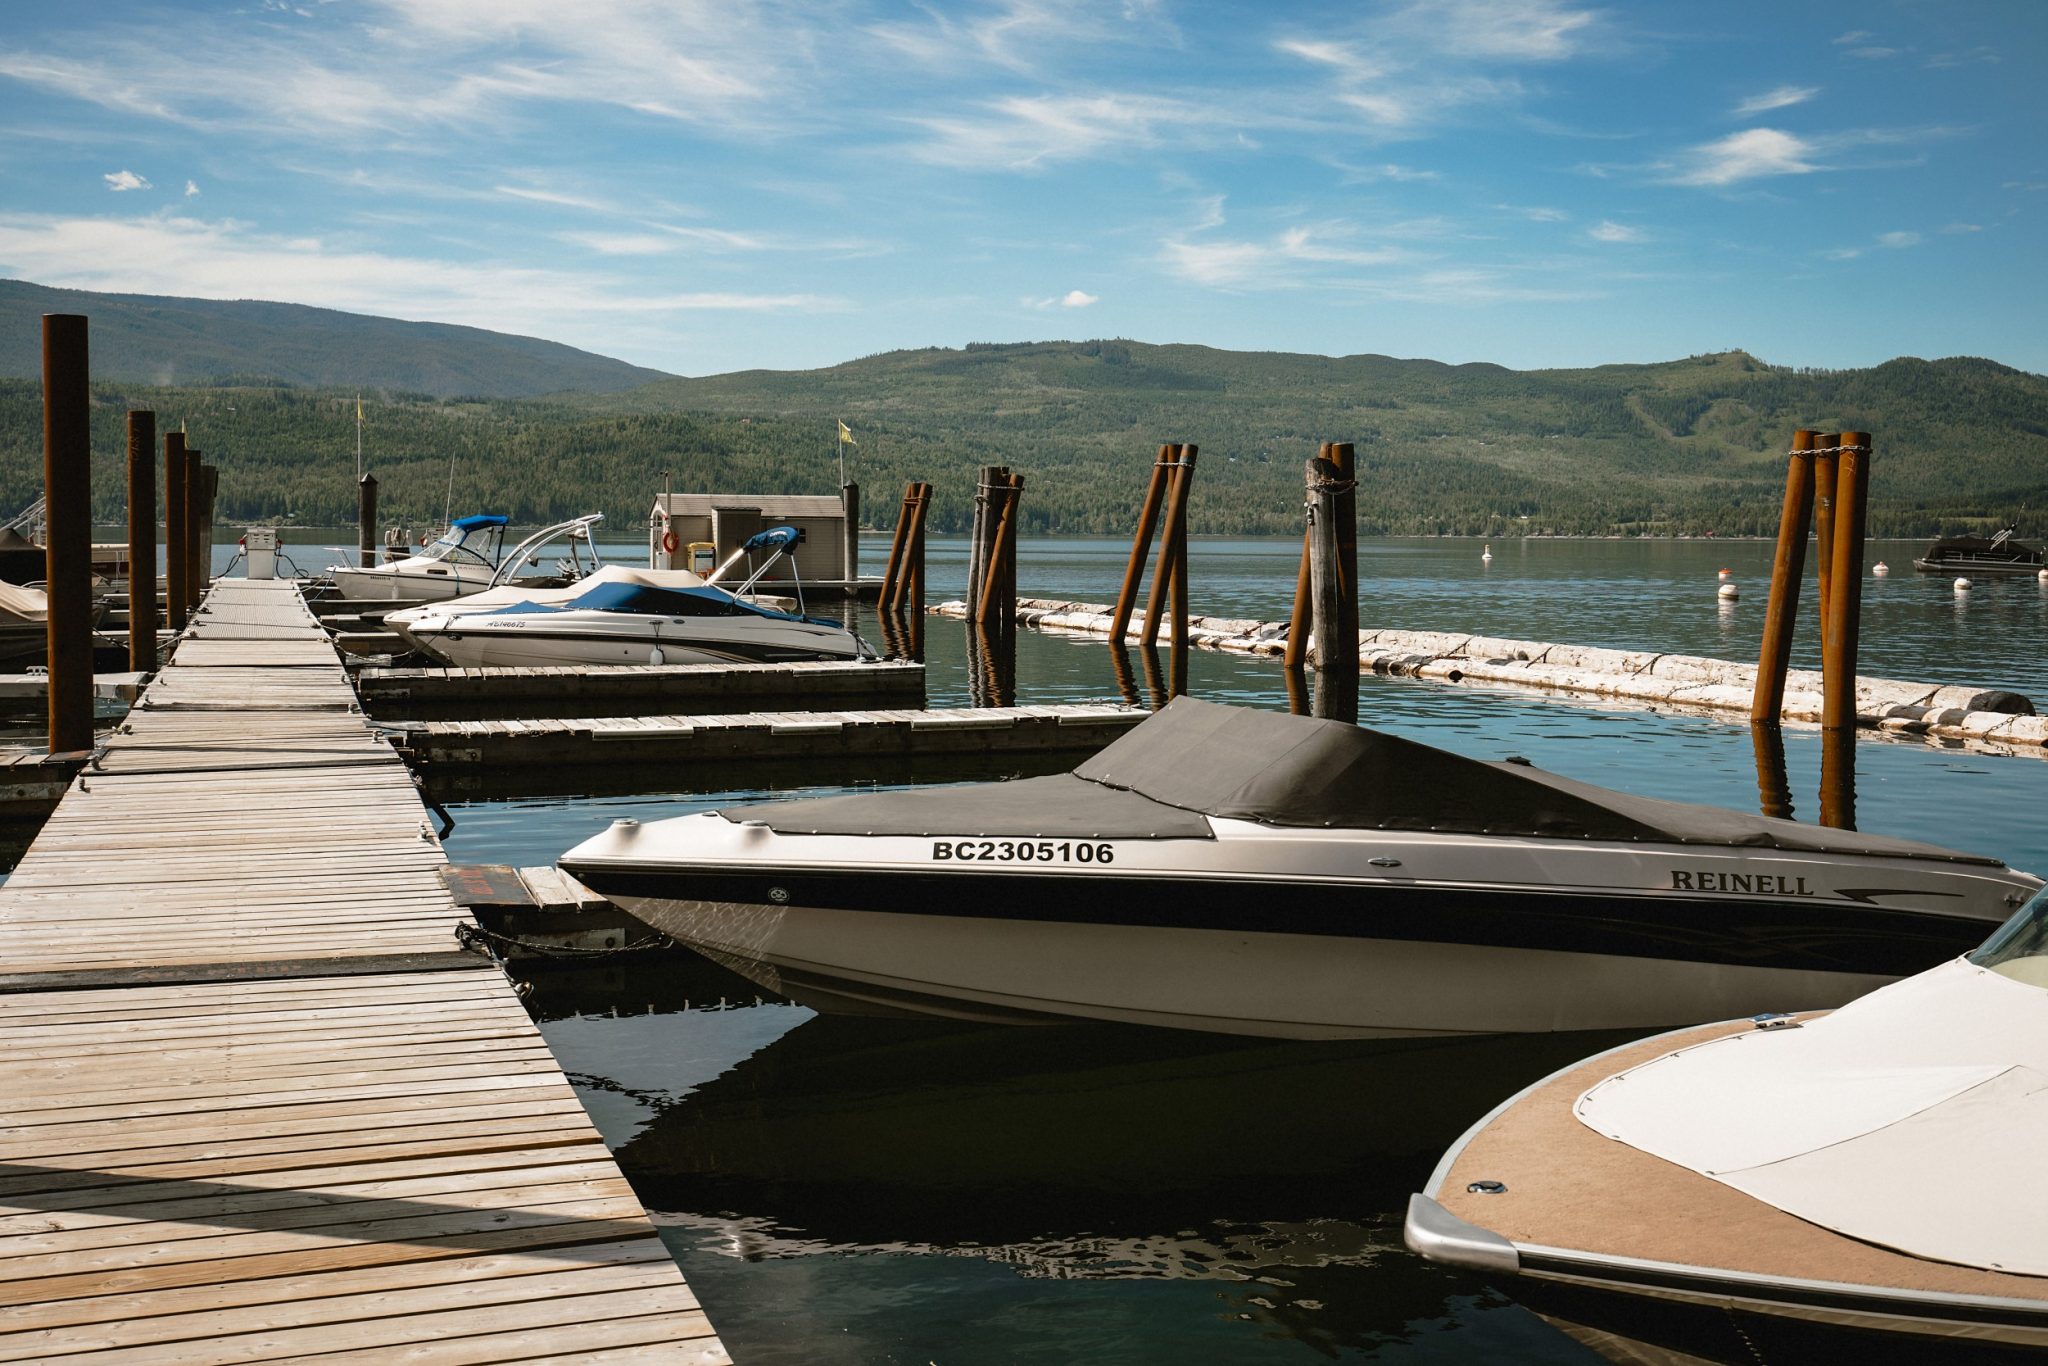 Anglemont Marina: On the north shore of Shuswap Lake, you’ll find Anglemont Marina, your one-stop moorage destination since 1960. Accessible by boat or vehicle, Anglemont Marina is the place for moorage, supplies, marina gas […]